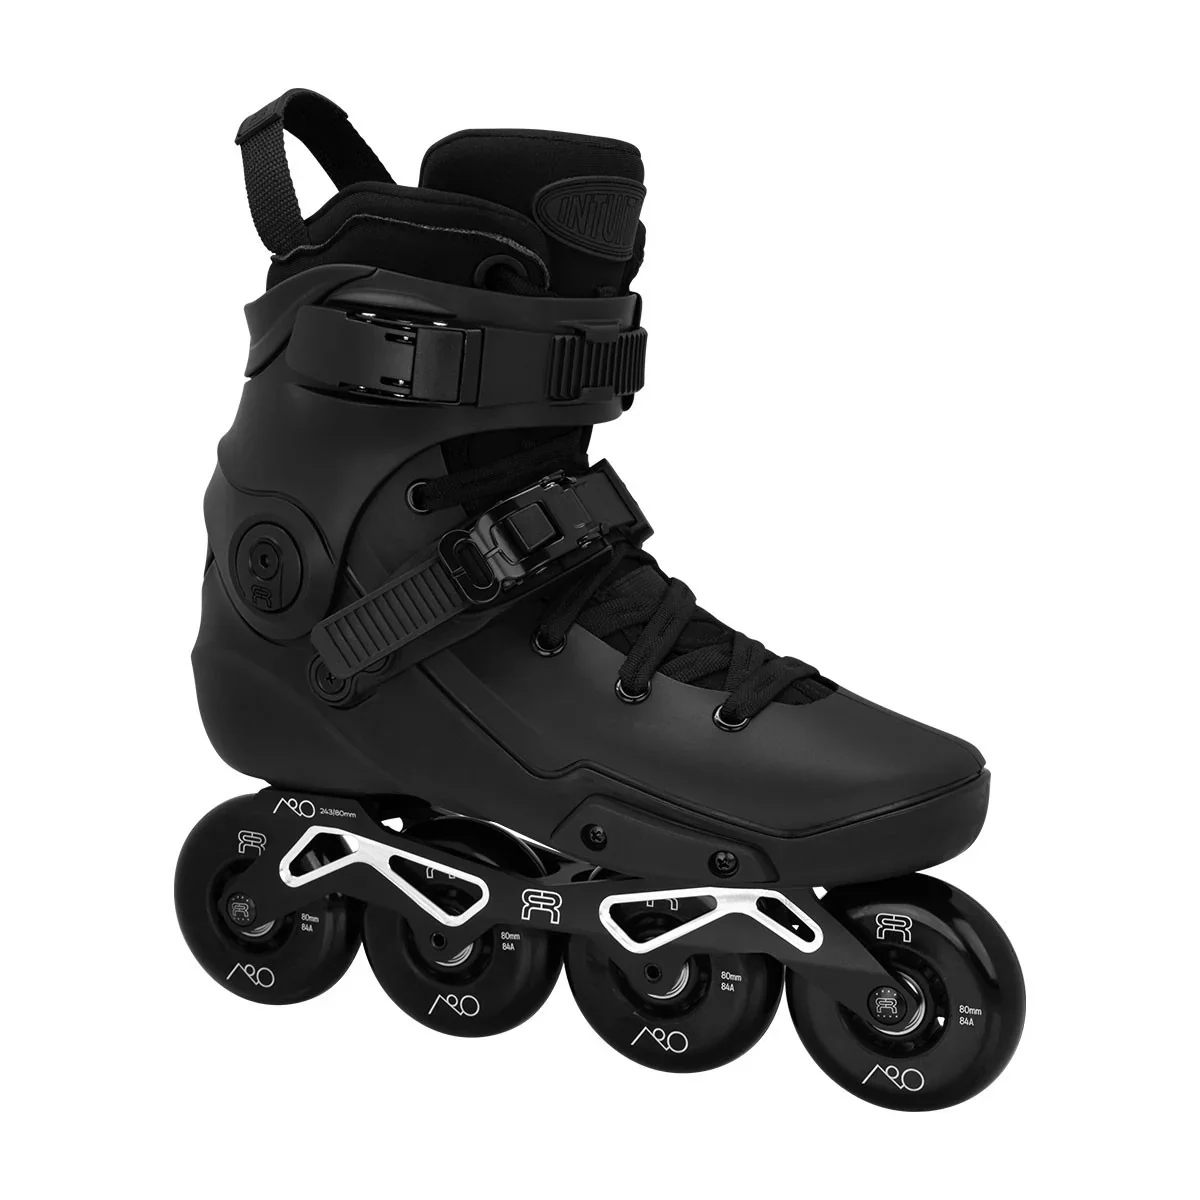 NEO 1 Dual 80 Intuition Freeskate